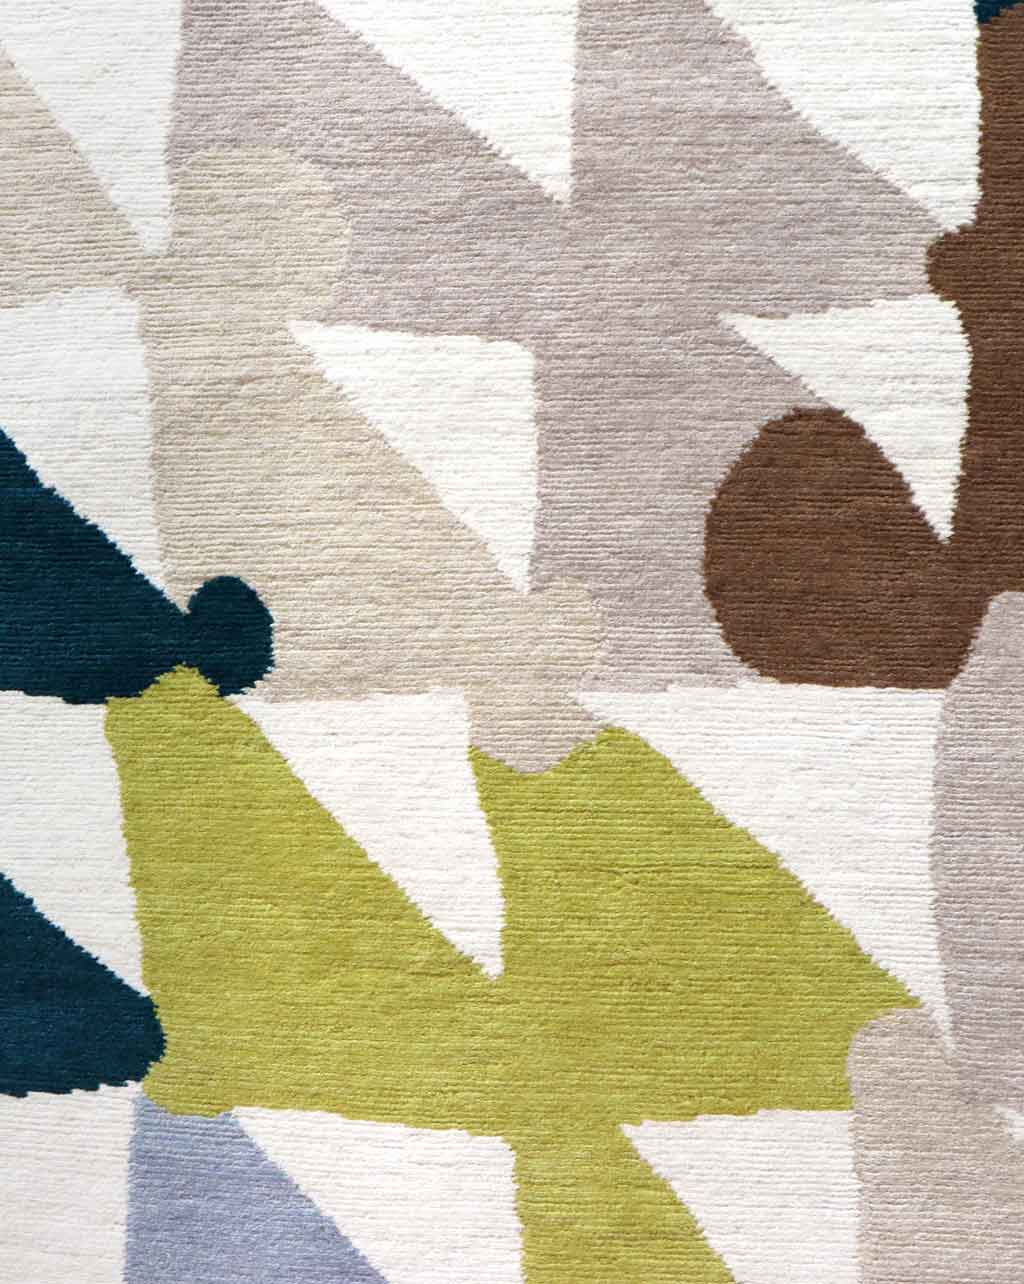 A close up of a Tibetan crossweave rug with geometric shapes such as checkerboards and Triangle Checks Hand Knotted Rug 5' x 8' Multi